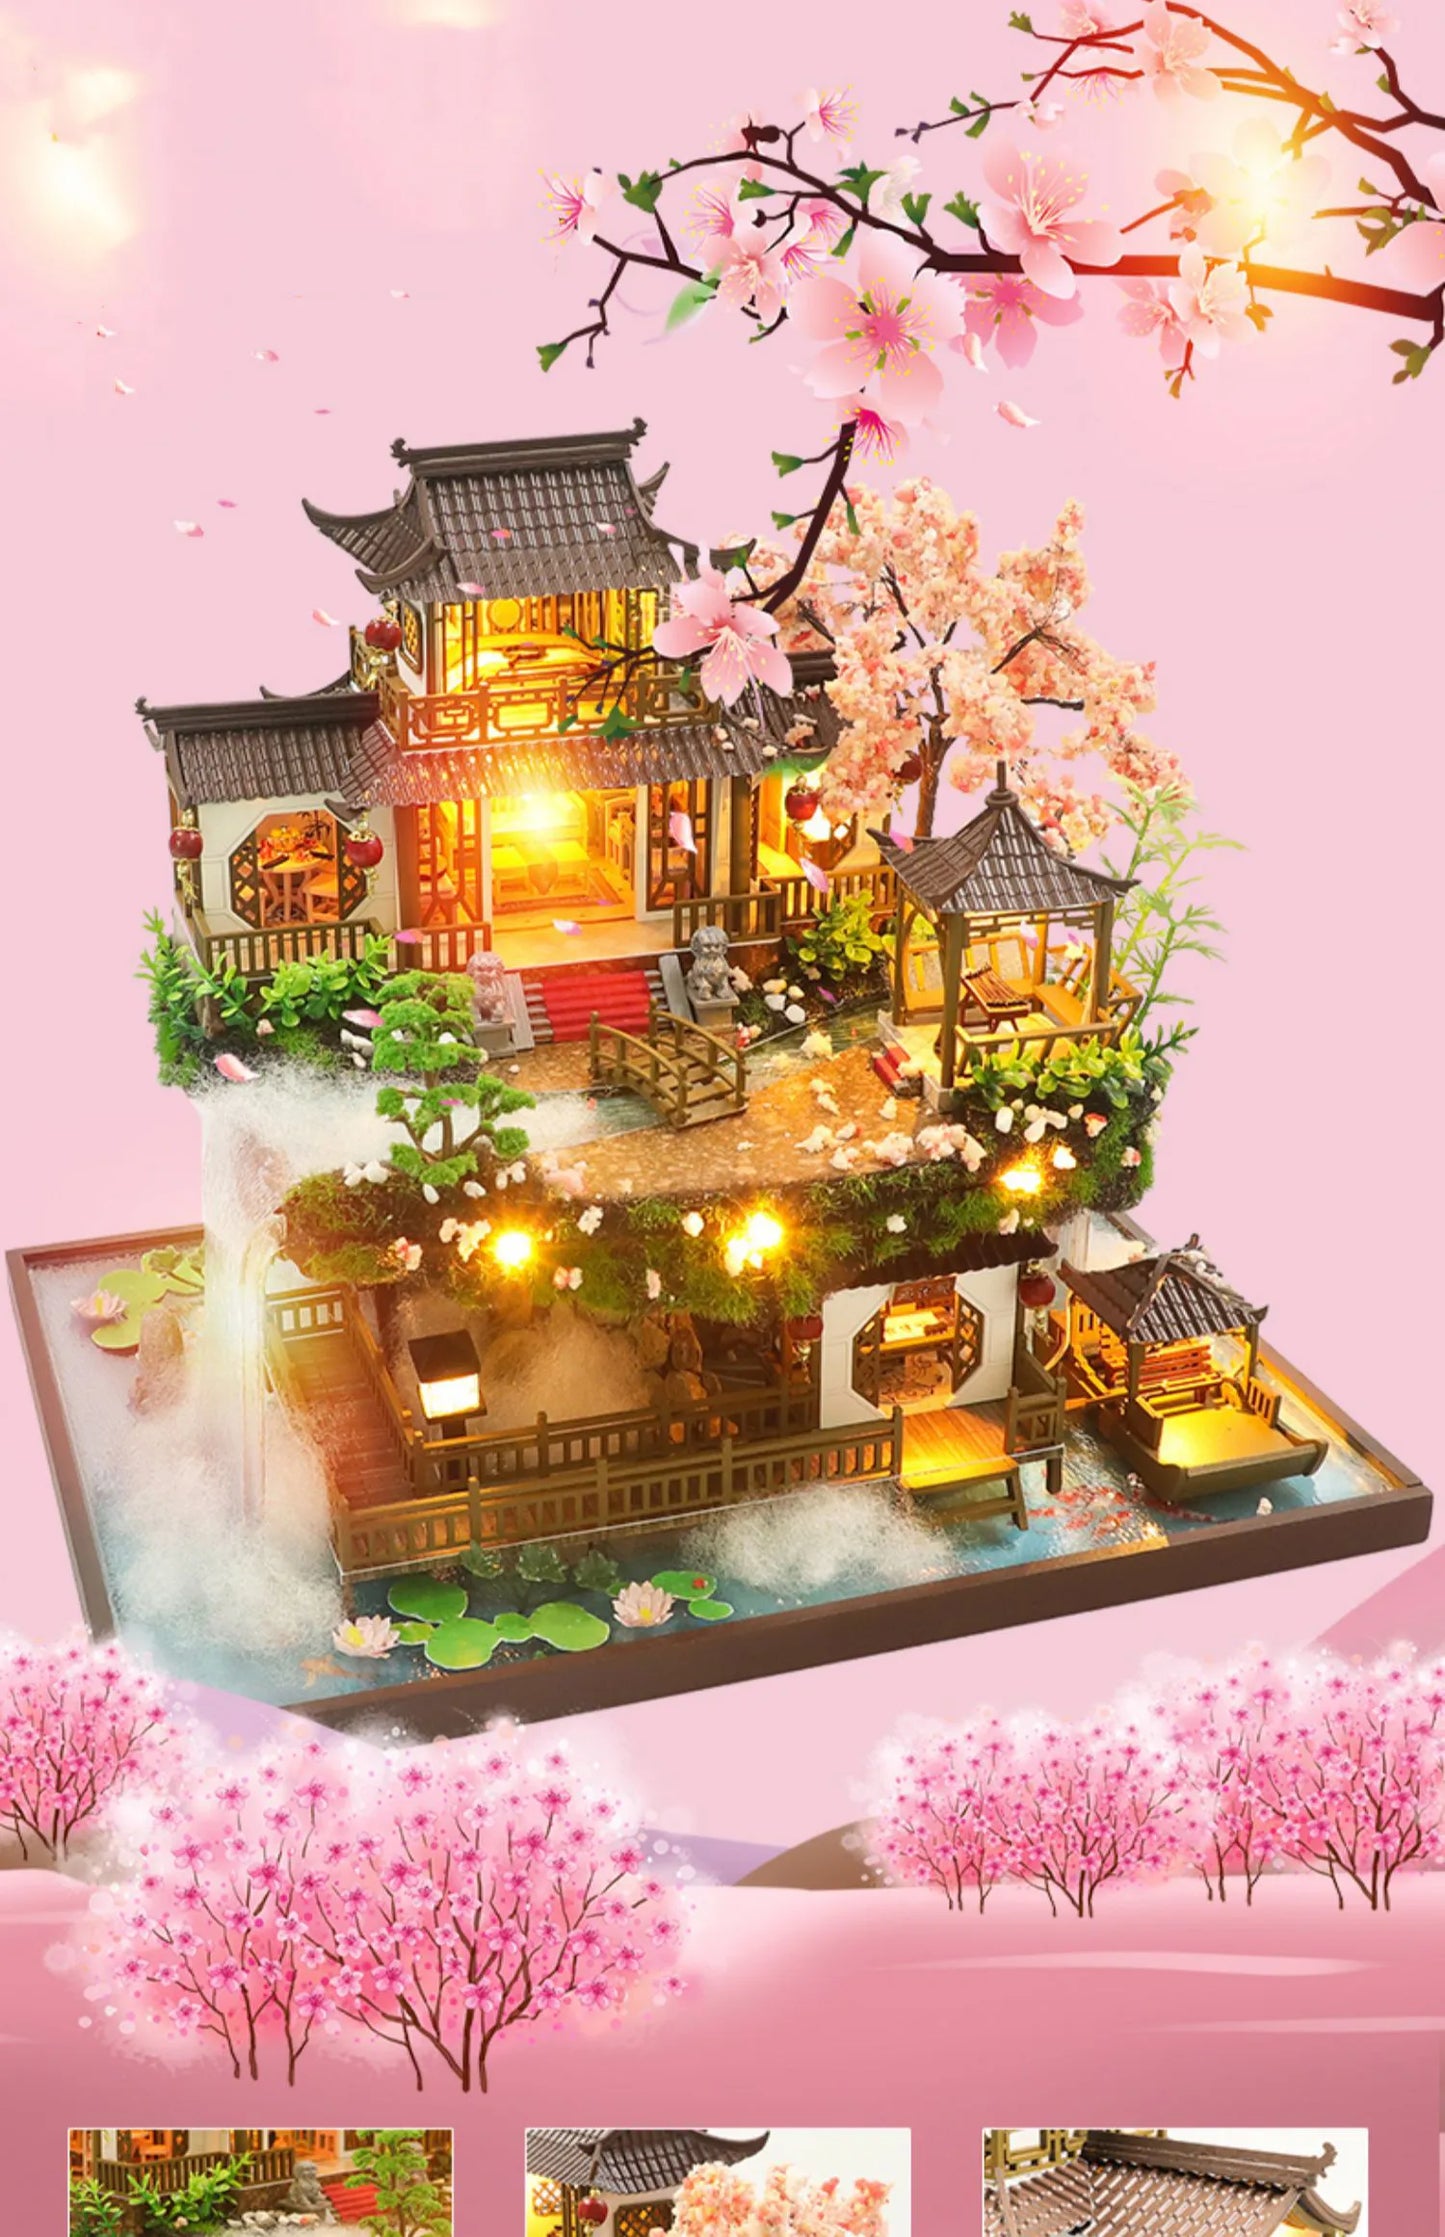 DIY Wooden Miniature Building Kit with Furniture from Chinese Ancient Casa Dollhouse Handmade